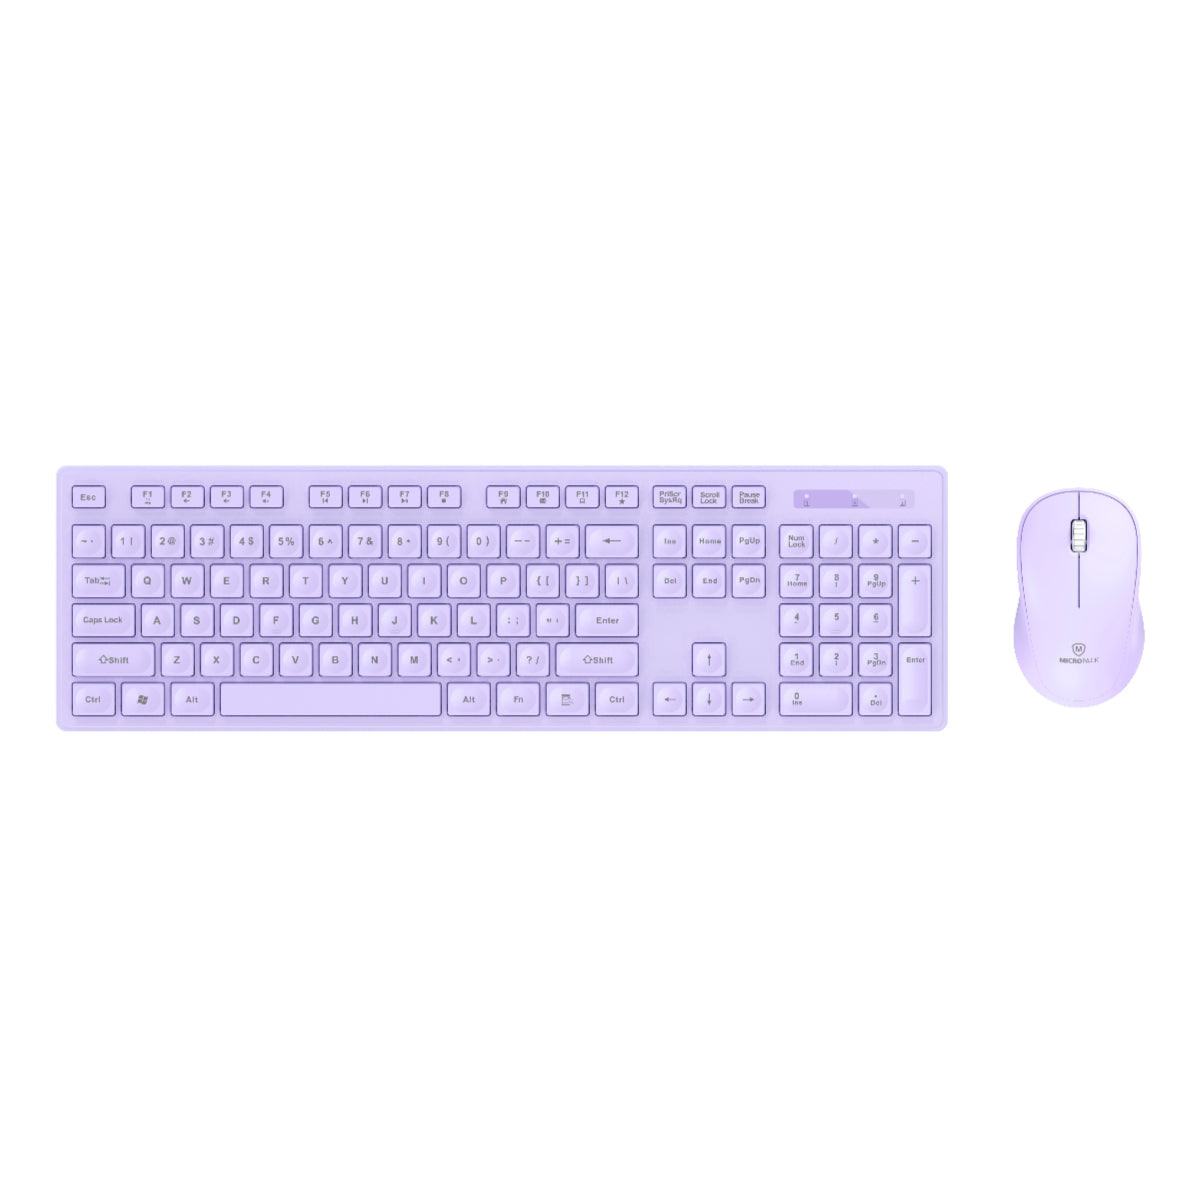 USB Wireless Mouse and Keyboard Combo for Laptop Computer KM-237W purple